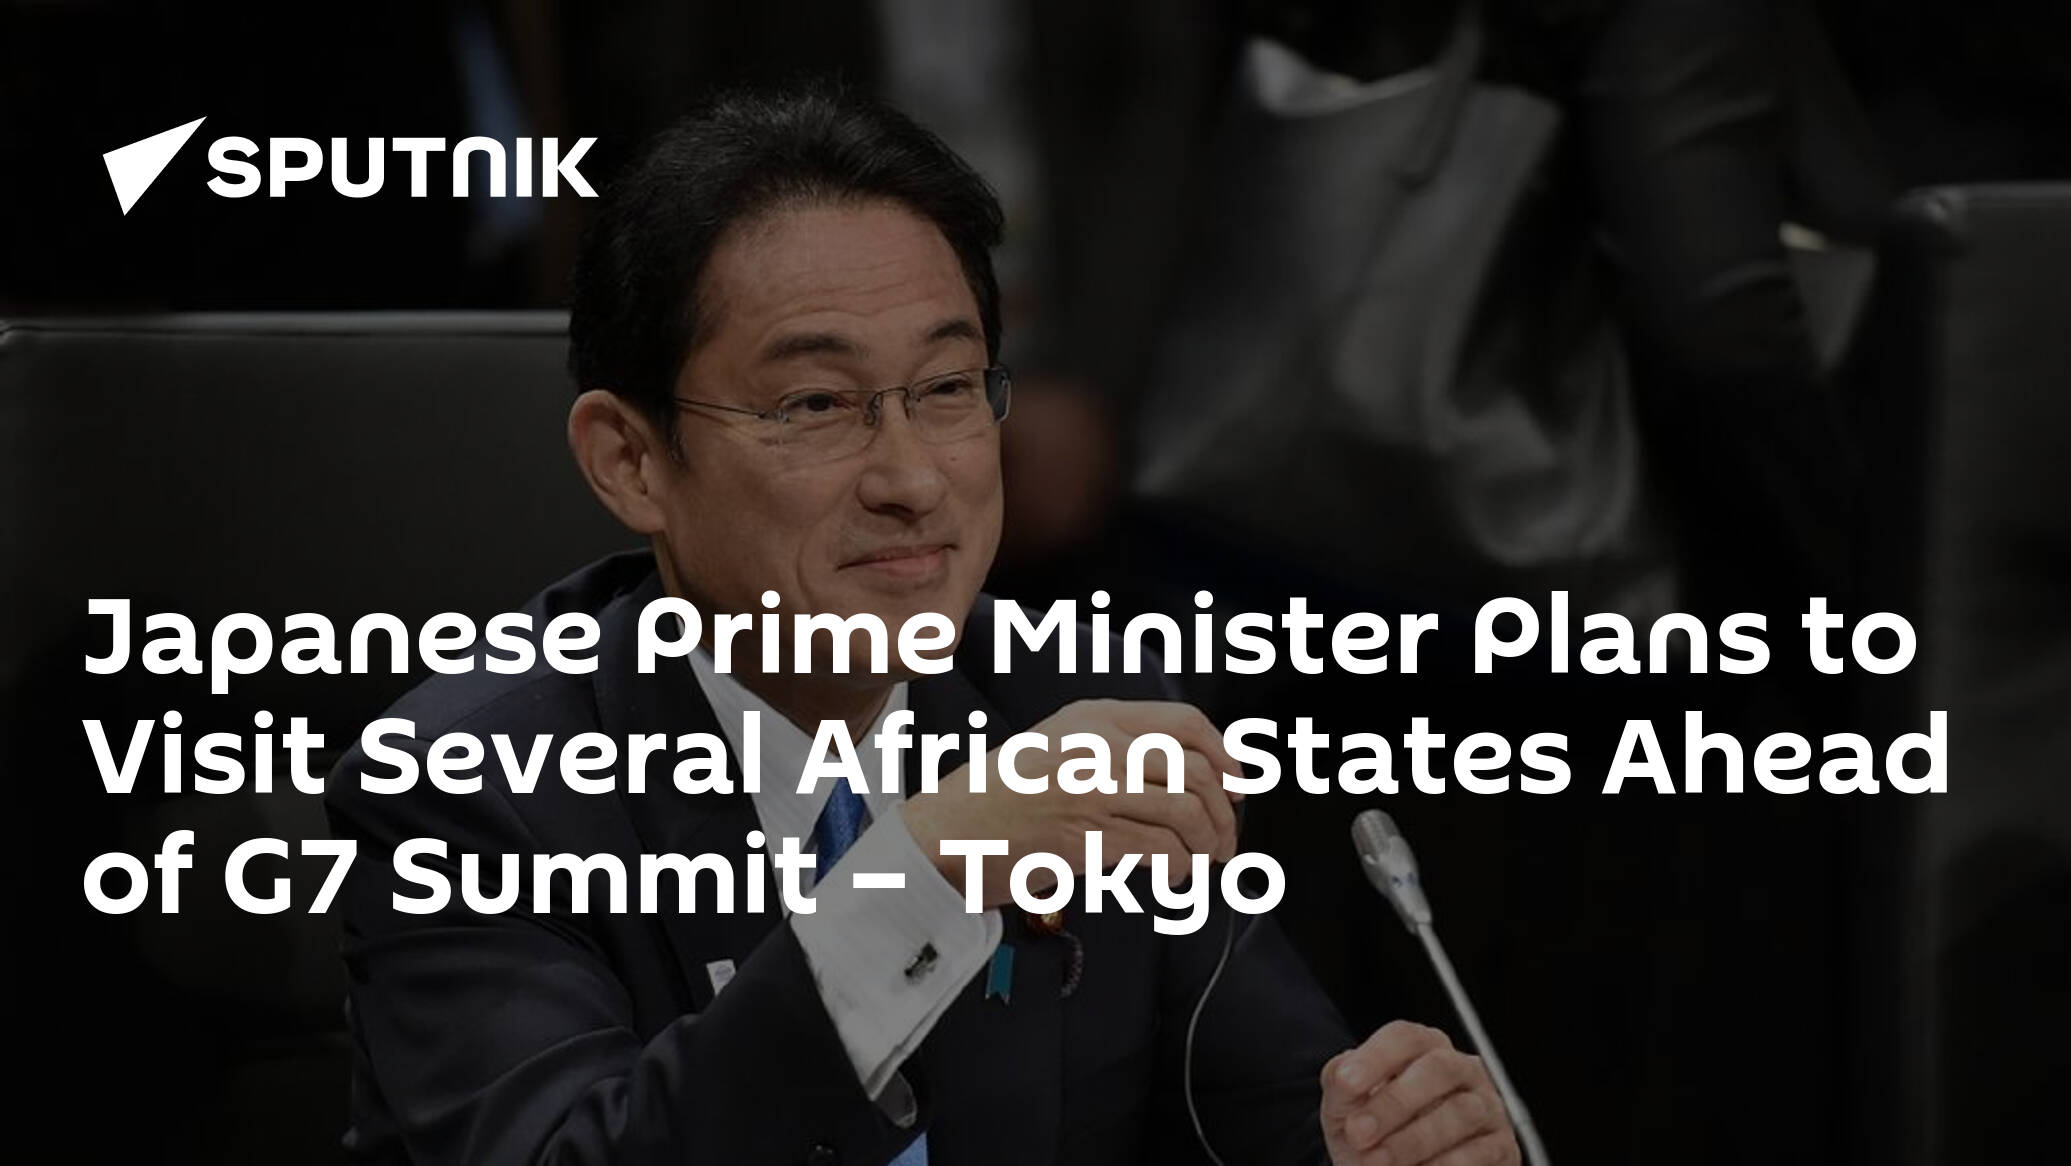 Japanese Prime Minister Plans to Visit Several African States Ahead of G7 Summit – Tokyo